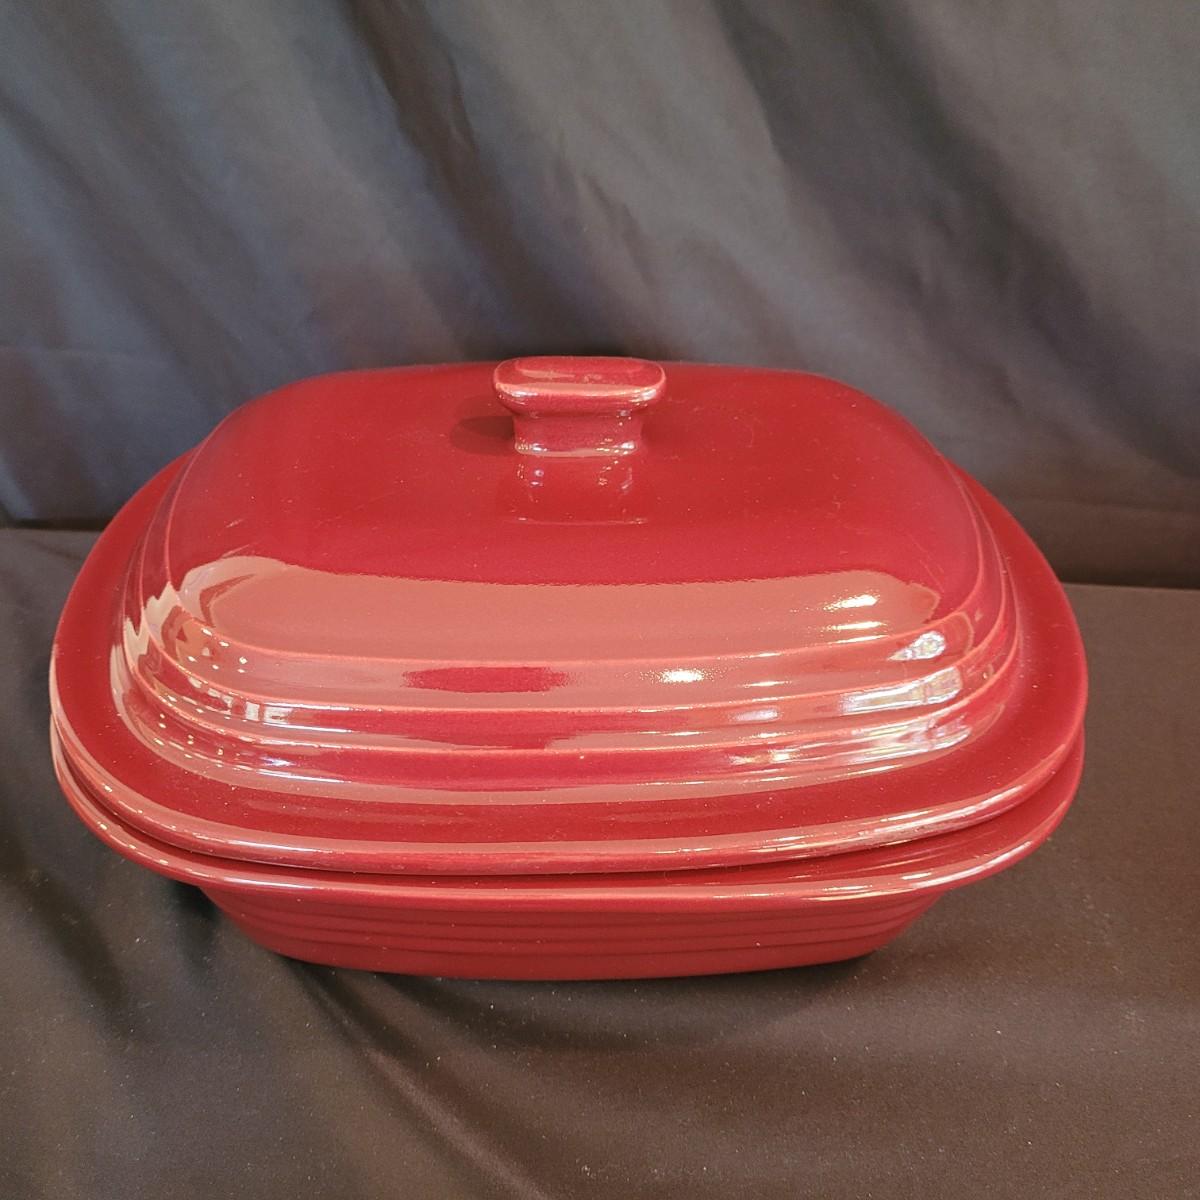 Pampered Chef Stoneware Baking Dish and More (SR-CE)